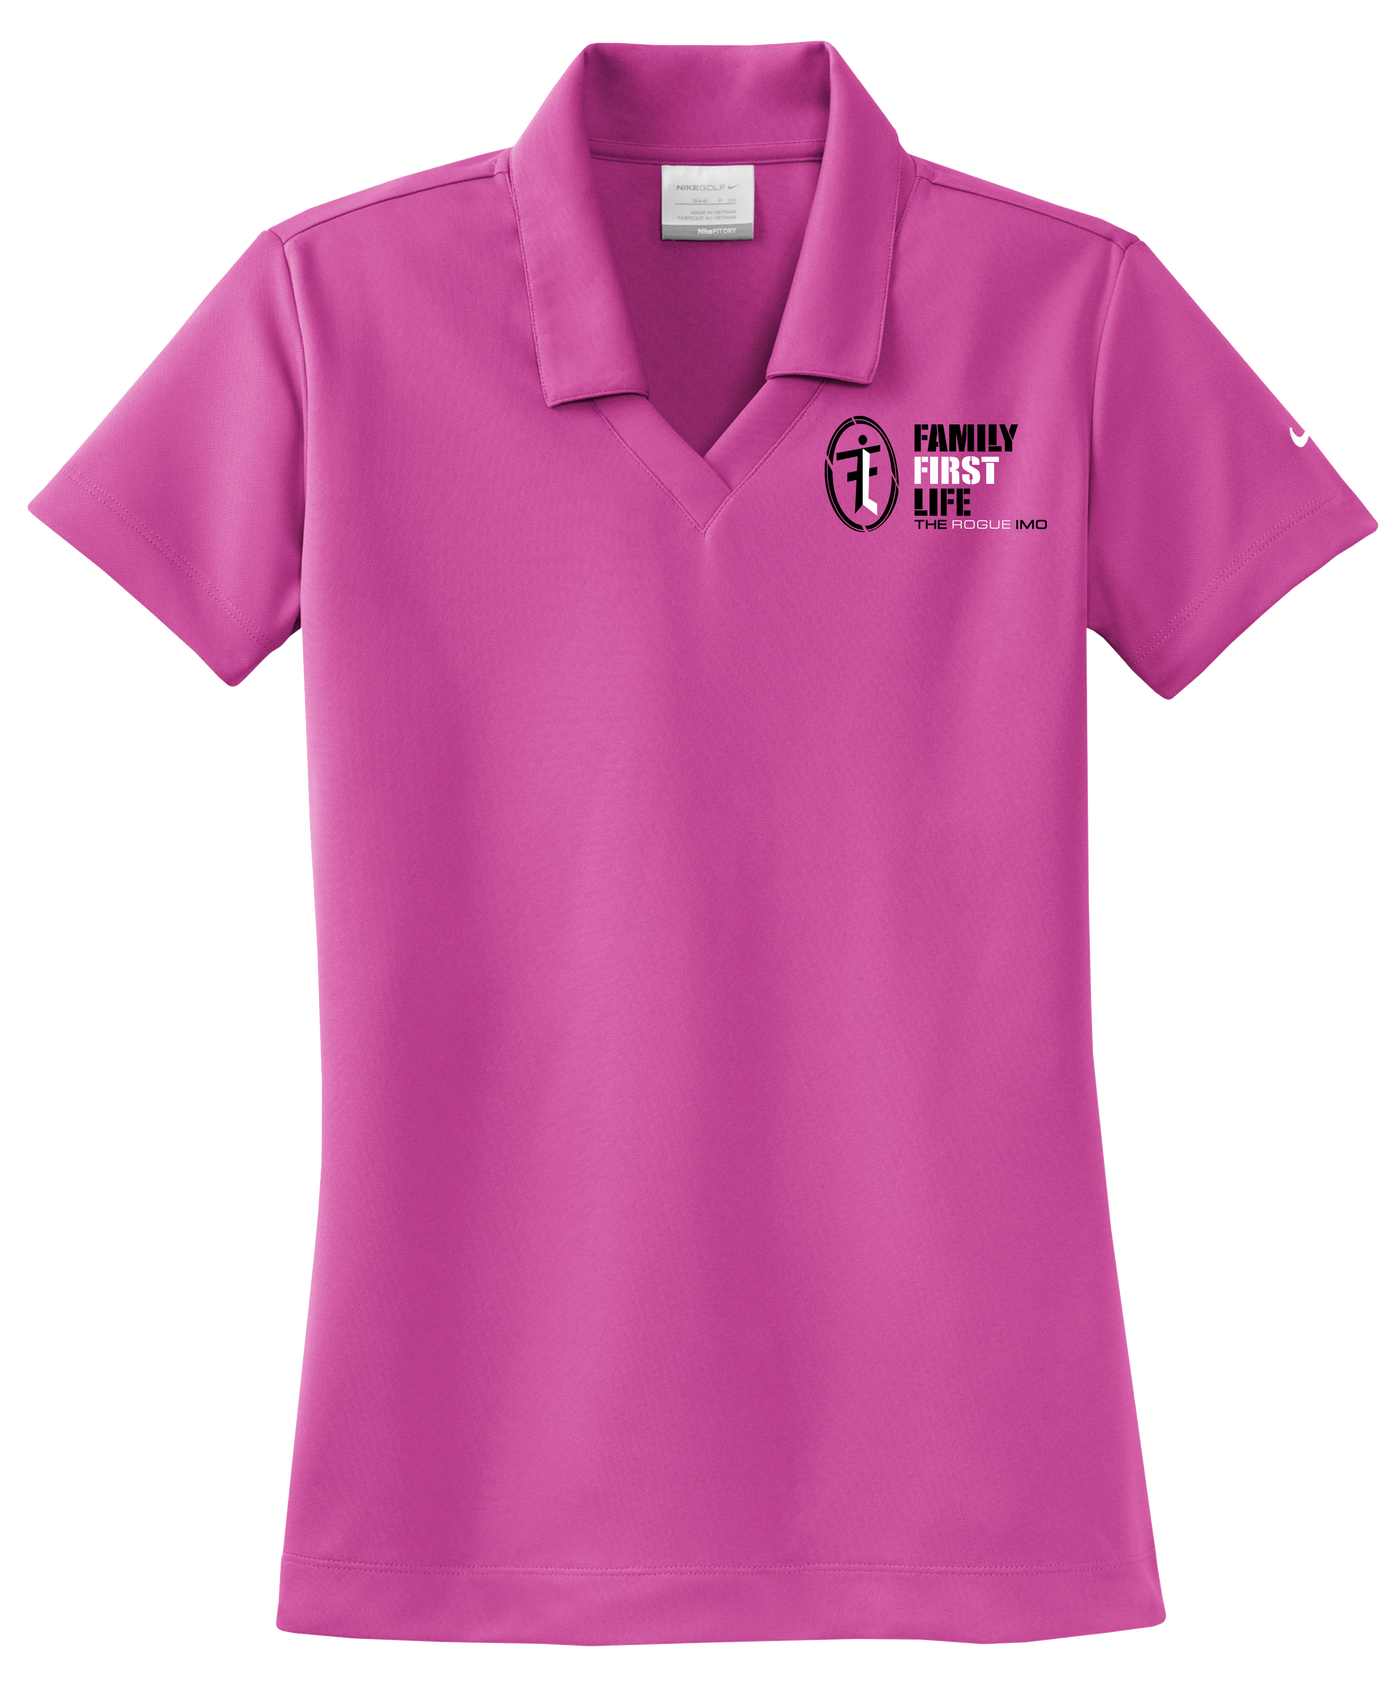 Women's Nike Polo: Fusion Pink (Discontinued)